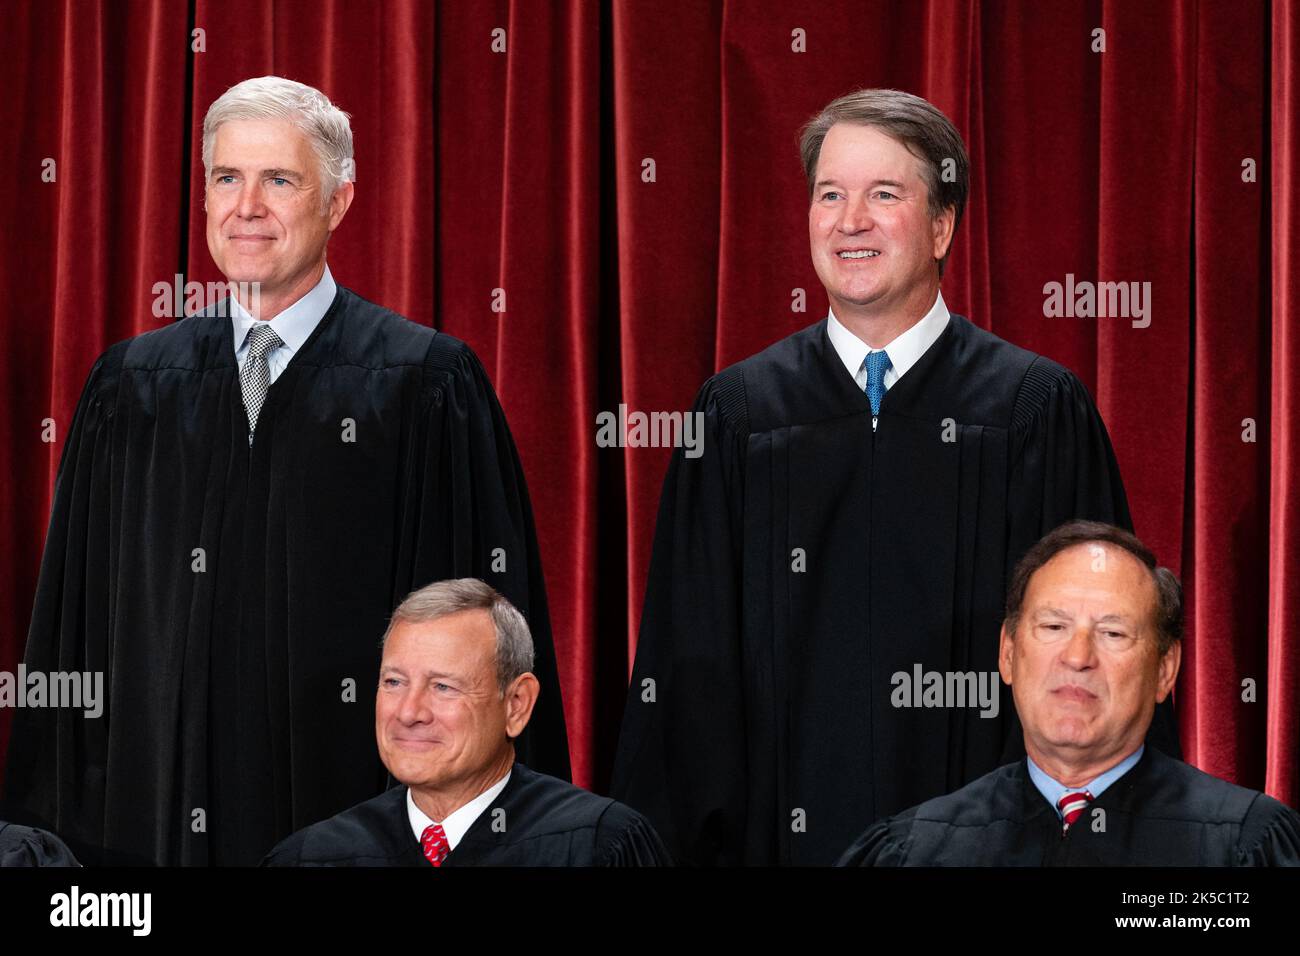 Justices of the US Supreme Court during a formal group photograph at the Supreme Court in Washington, DC, US, on Friday, Oct. 7, 2022. Seated from left: Chief Justice John Roberts and Associate Justice Samuel Alito Jr. Standing from left: Associate Justice Neil Gorsuch and Associate Justice Brett Kavanaugh. The court opened its new term Monday with a calendar already full of high-profile clashes, including two cases that could end the use of race in college admissions. Photo by Eric Lee/Pool/ABACAPRESS.COM Stock Photo